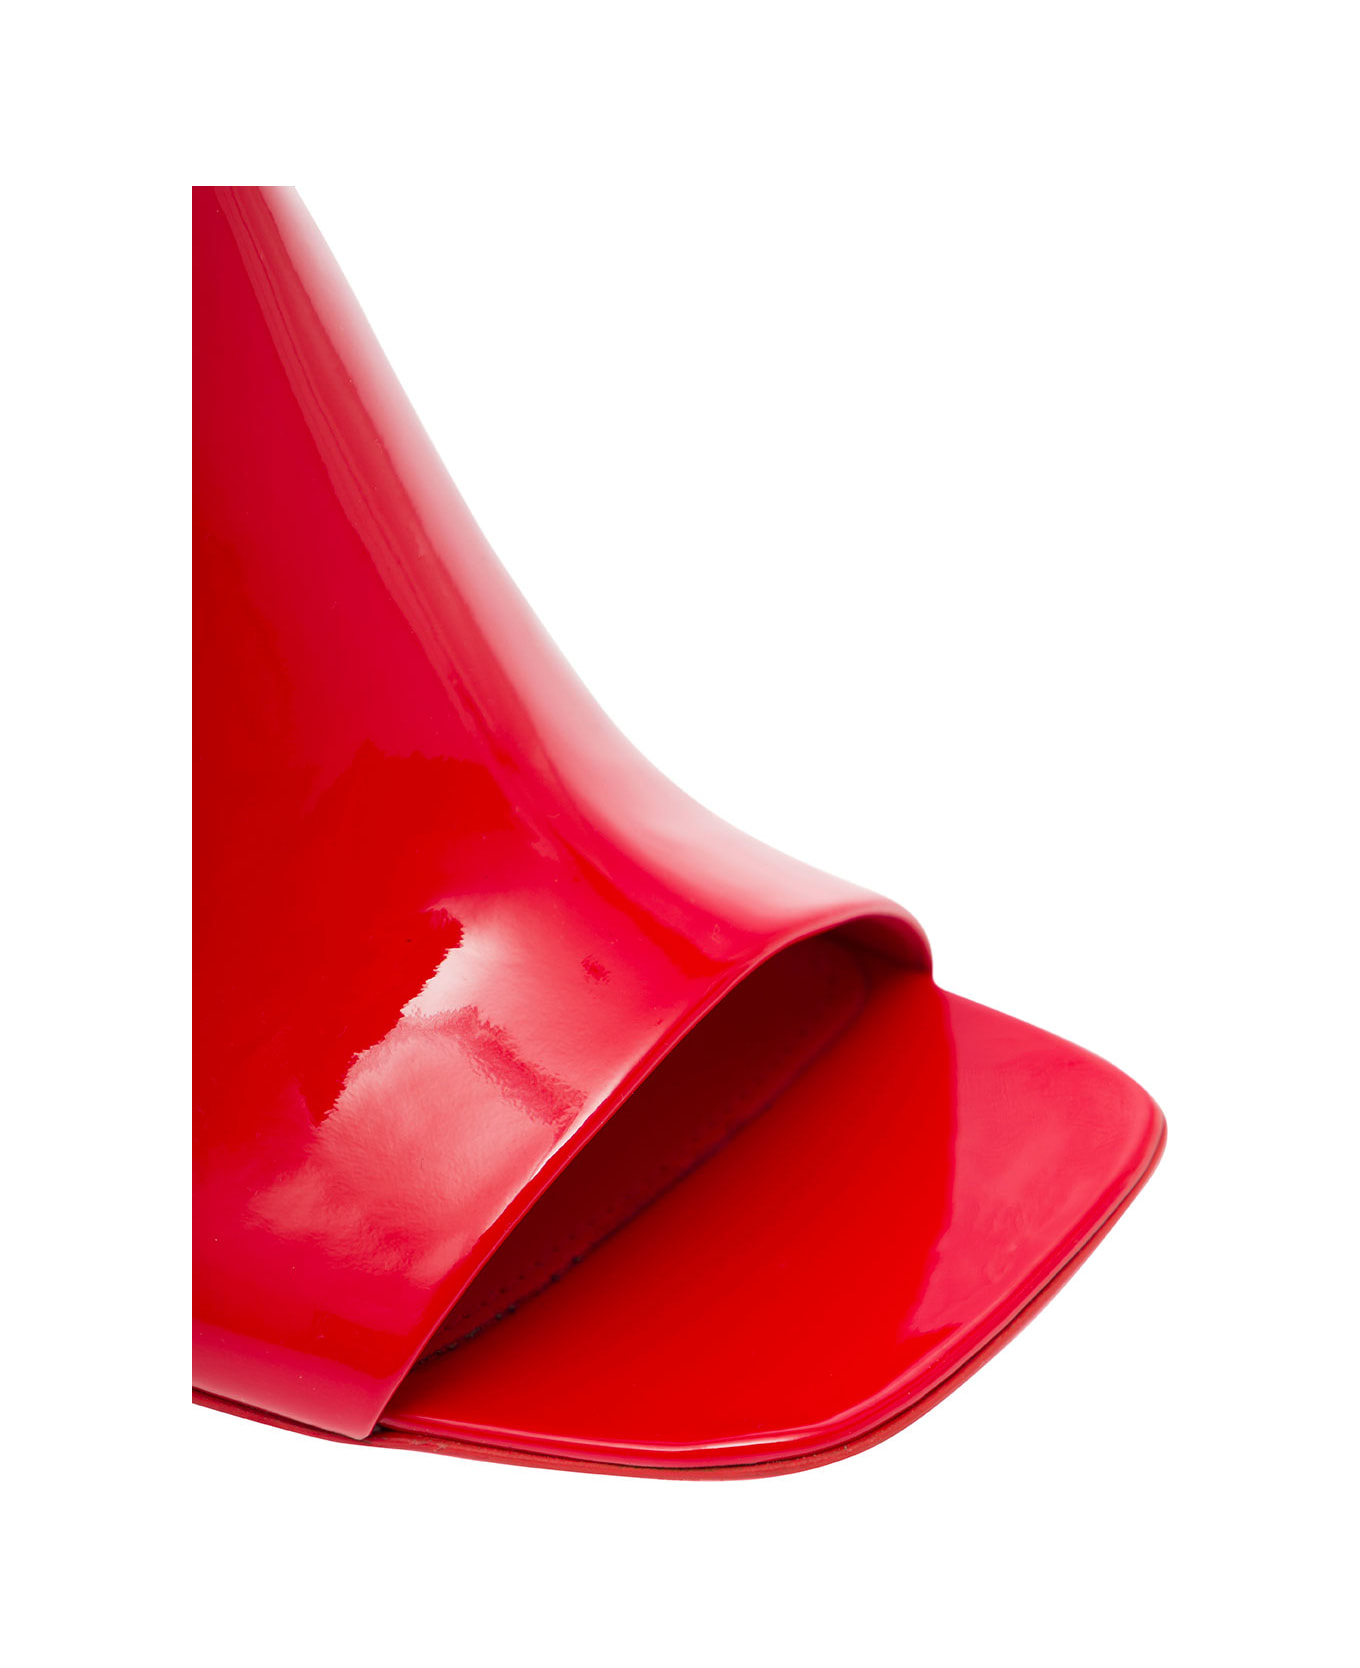 Ferragamo 'open Toe' Red Slide With Slanted, Contoured Heel In Patent Leather Woman - RED